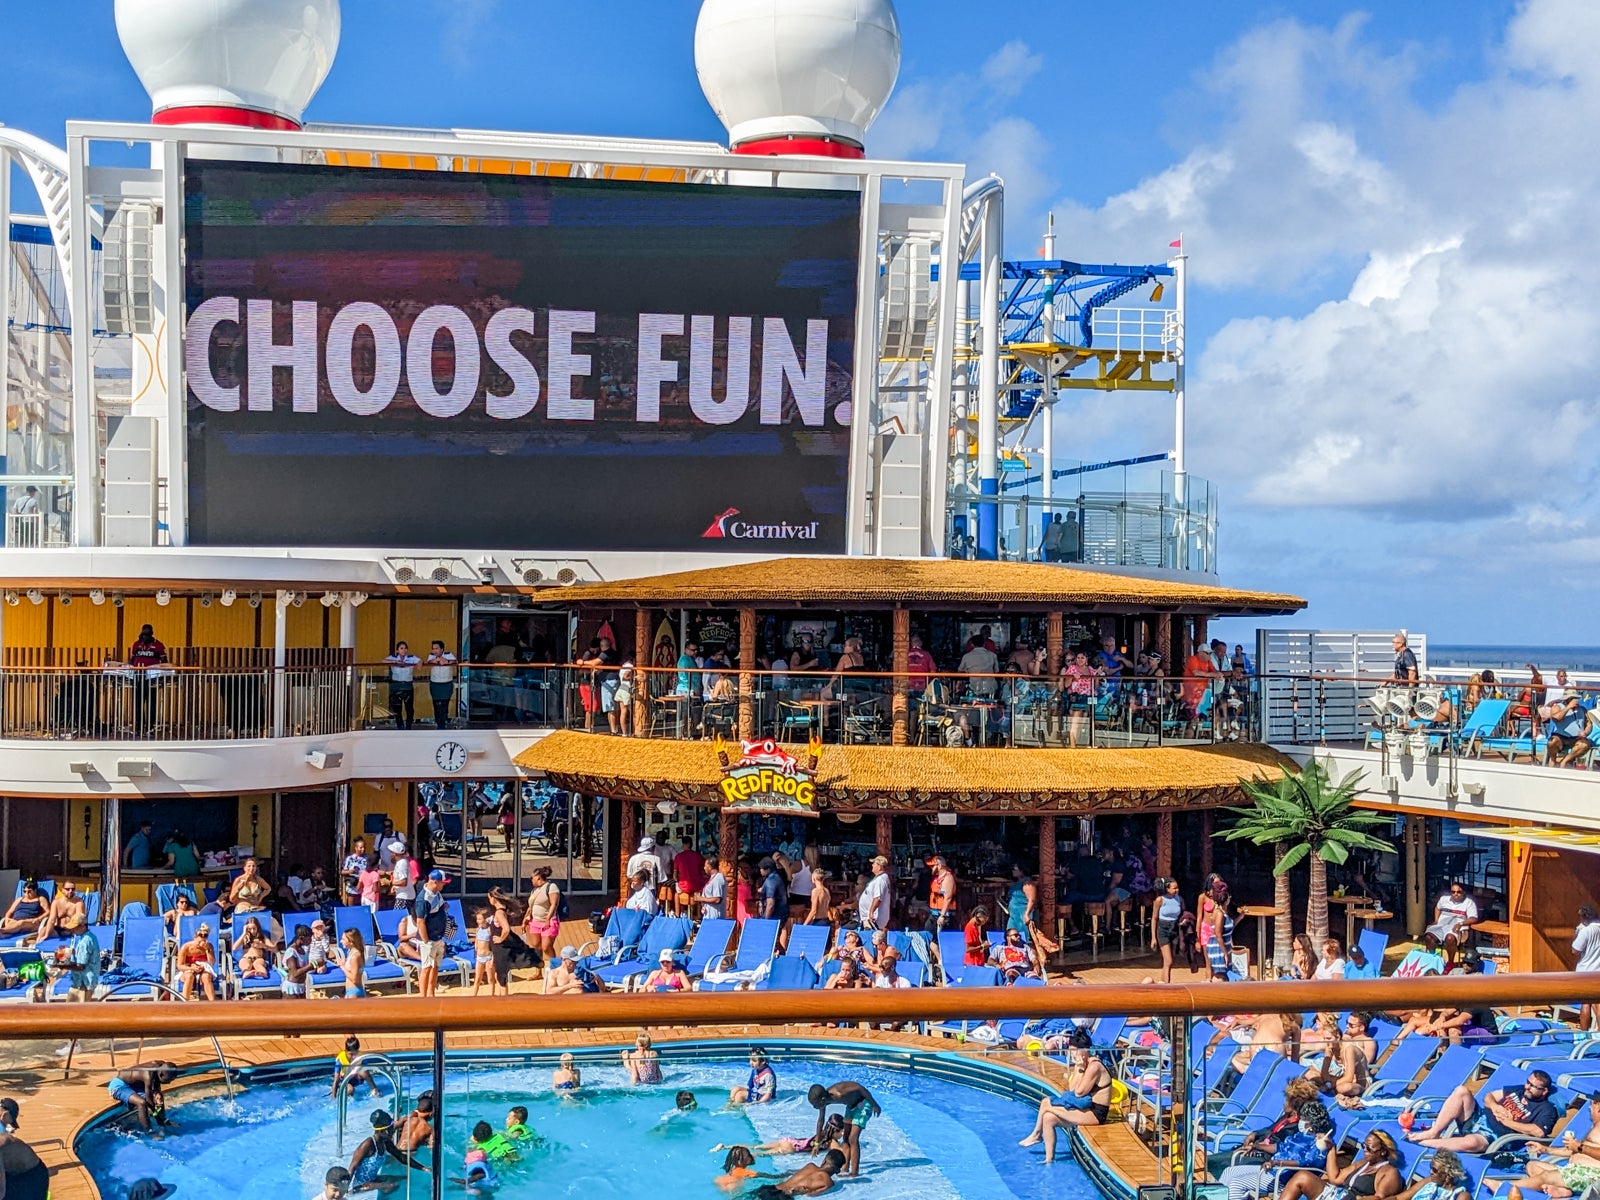 43 Carnival Cruise Line tips, tricks and hacks to enhance your vacation at sea